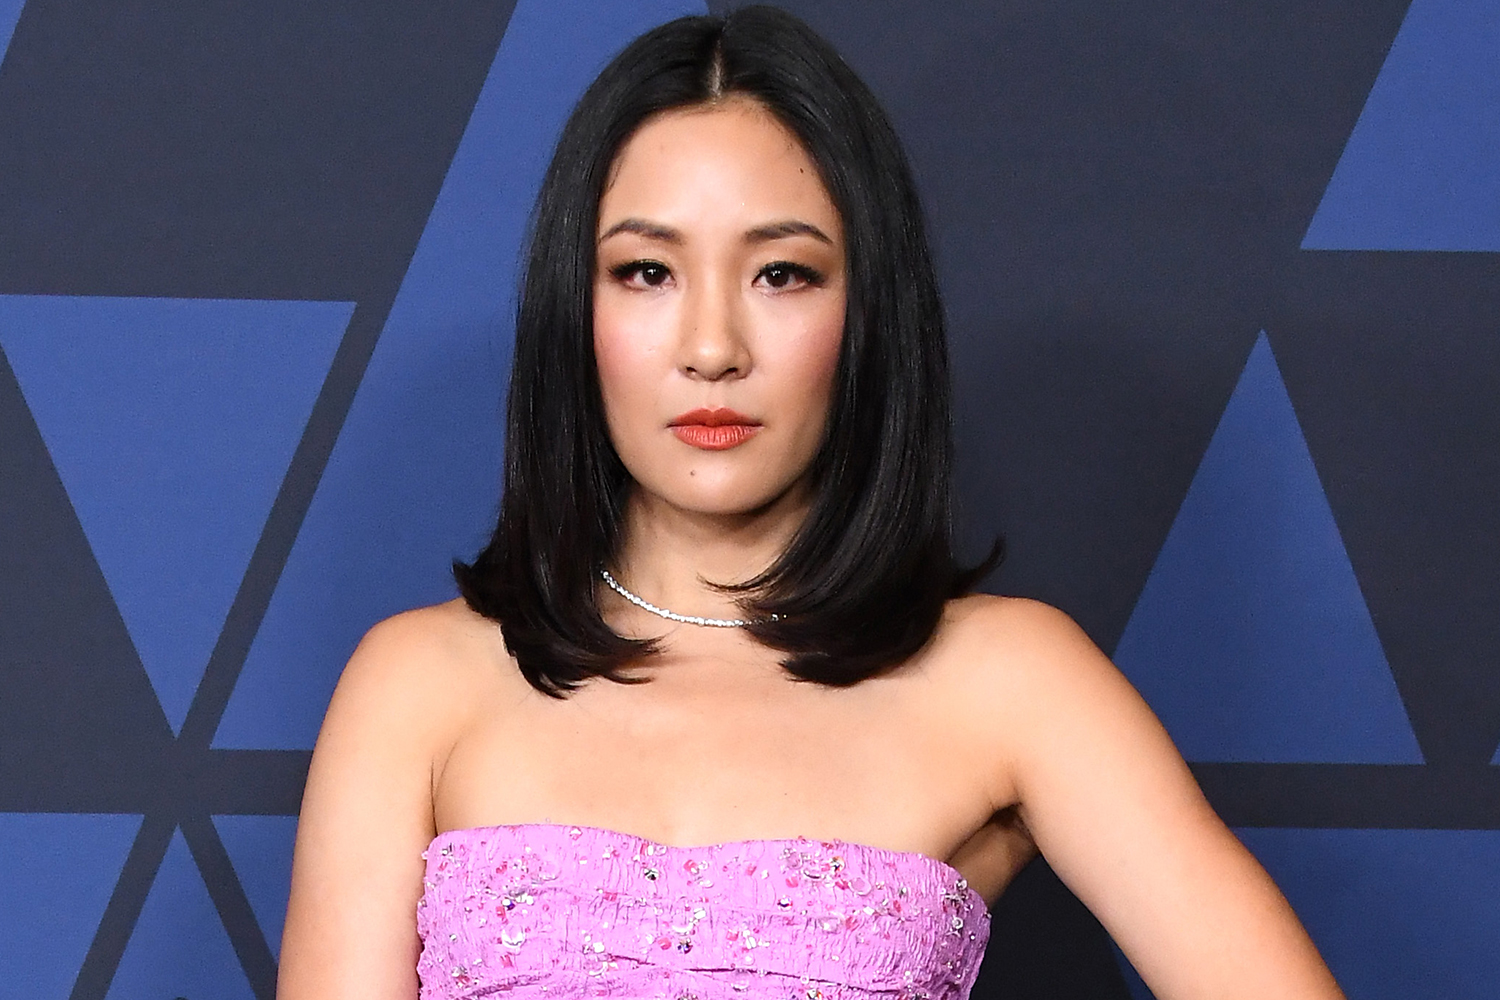 Constance Wu Returns to Instagram After Being 'Off the Grid Recovering'